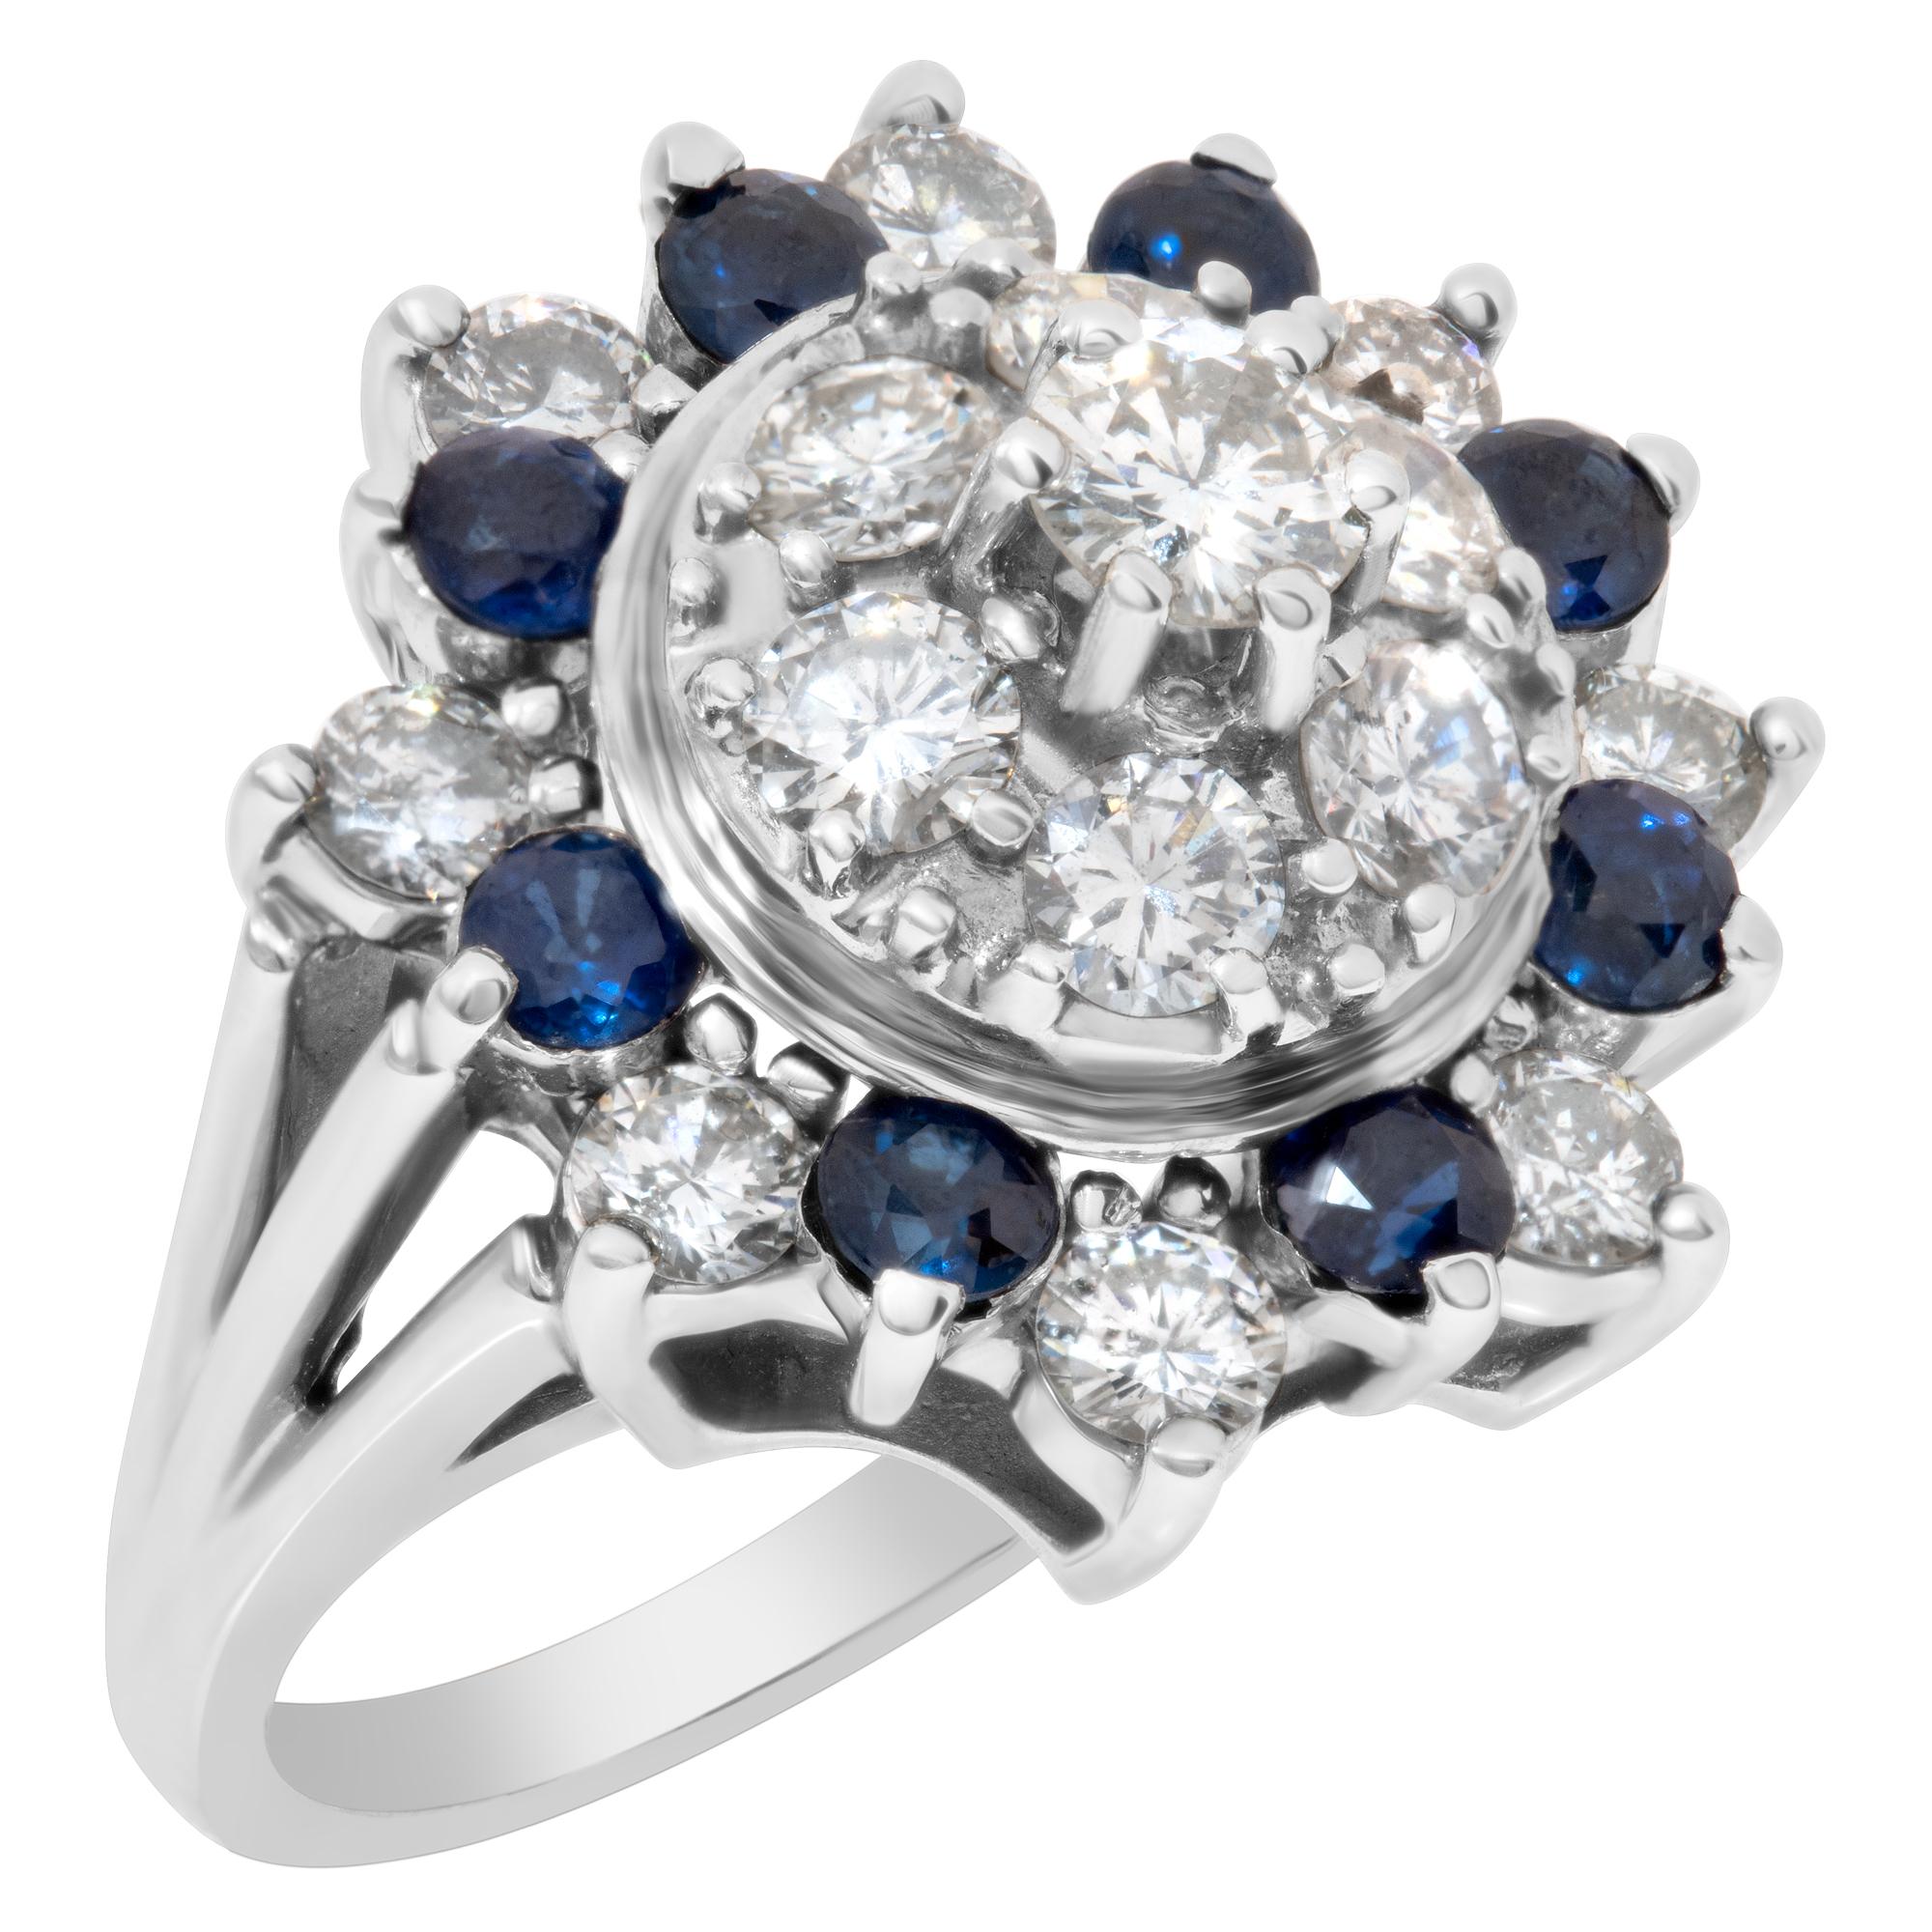 Sapphire '0.50cts' and Diamond '1.50cts' Ring 14k White Gold, Star Cluster In Excellent Condition For Sale In Surfside, FL